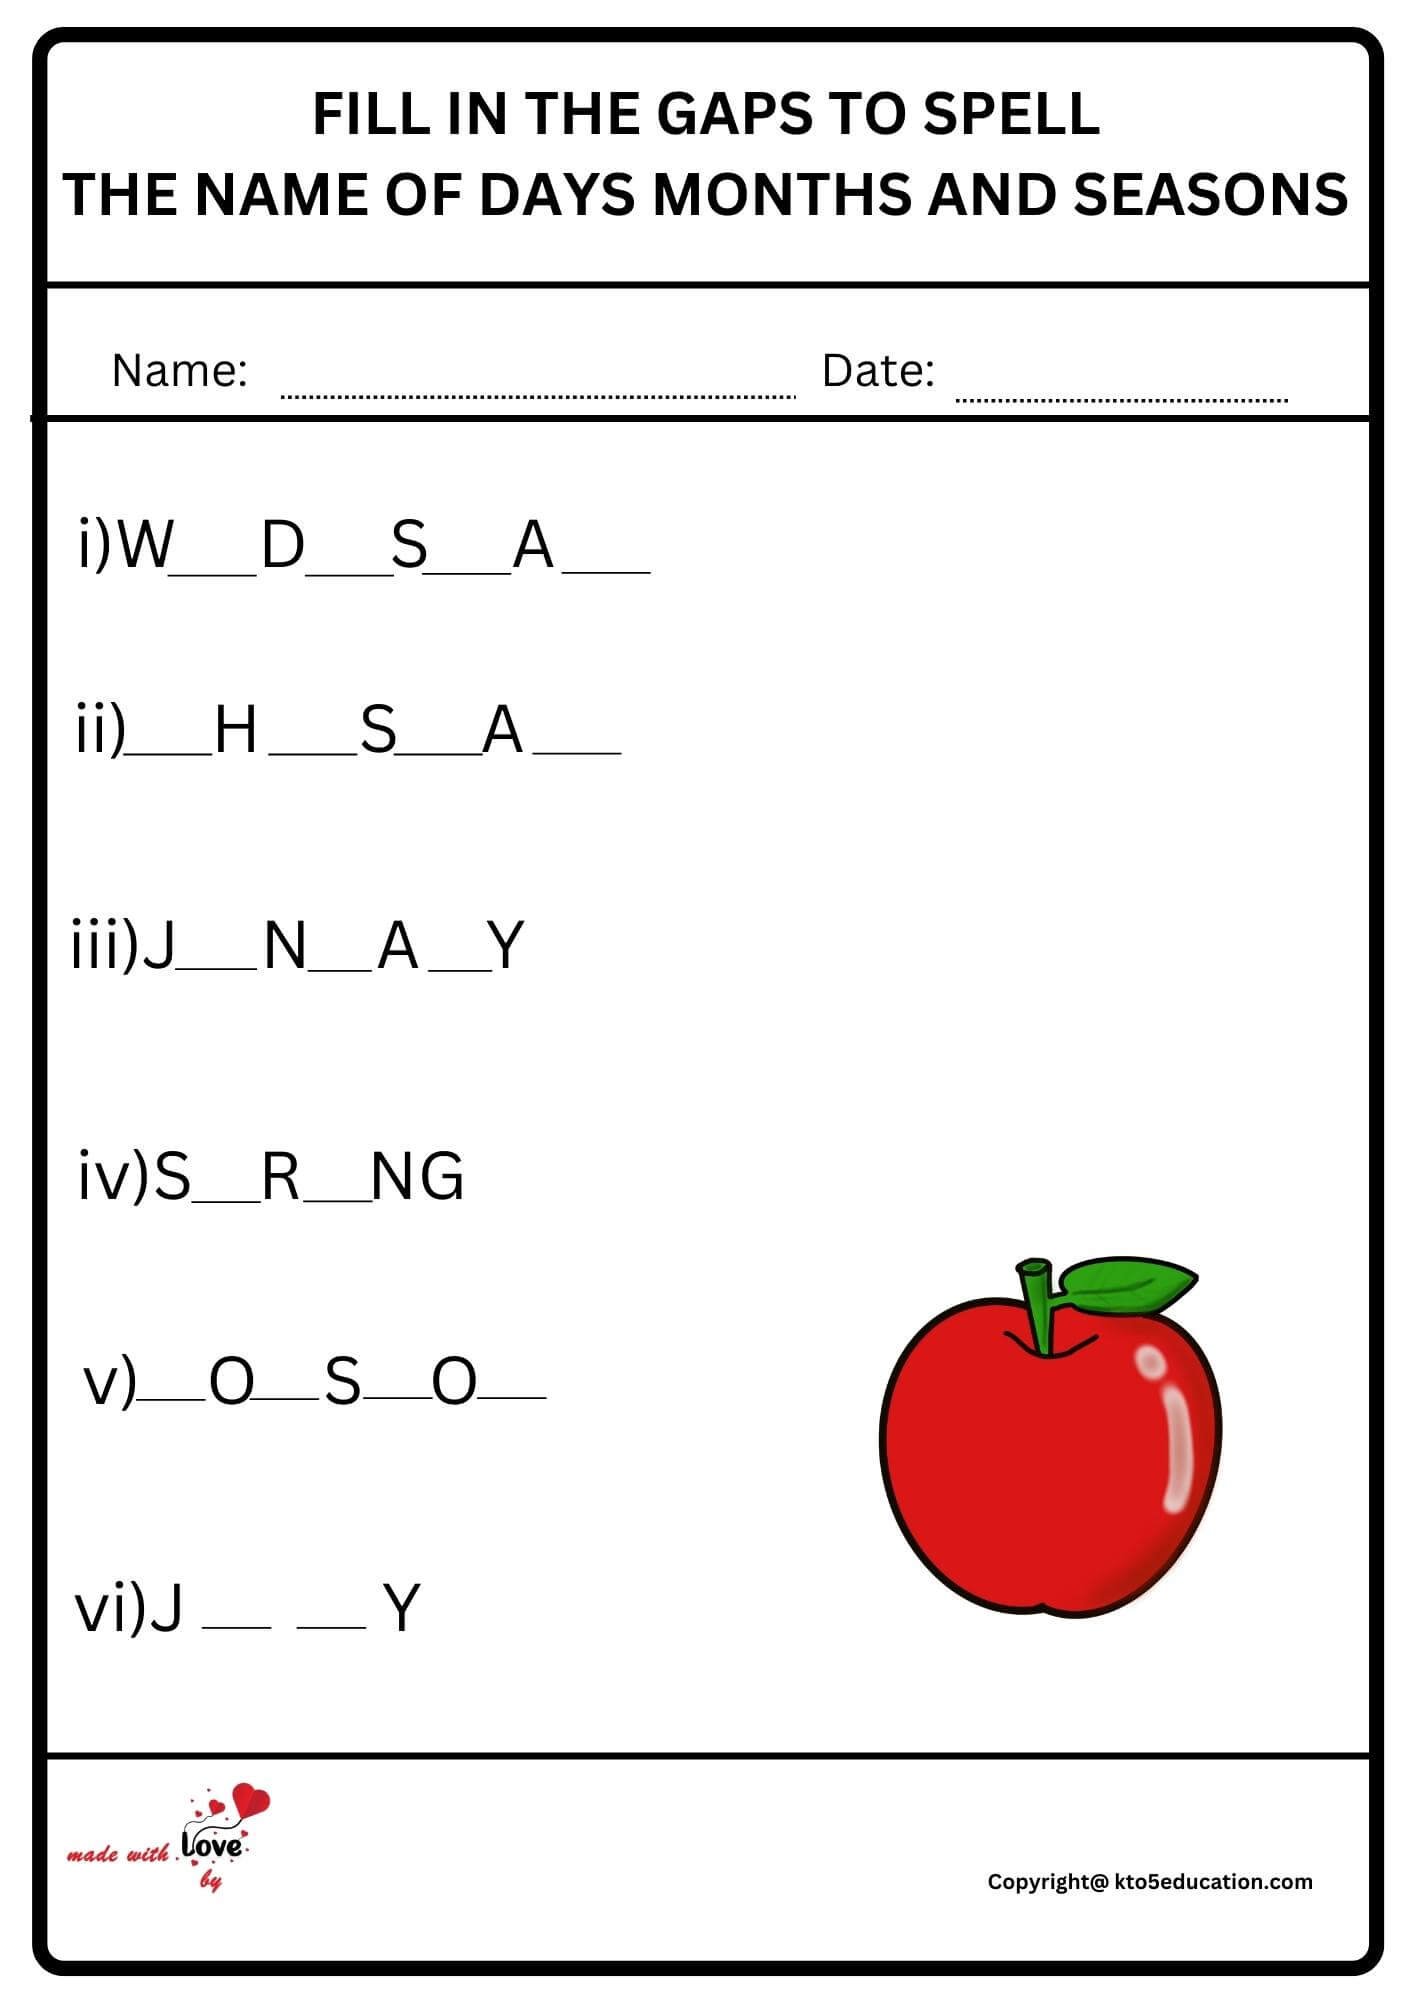 FIl In The Gaps To Spell The Name Of Days Months And Seasons worksheet 2